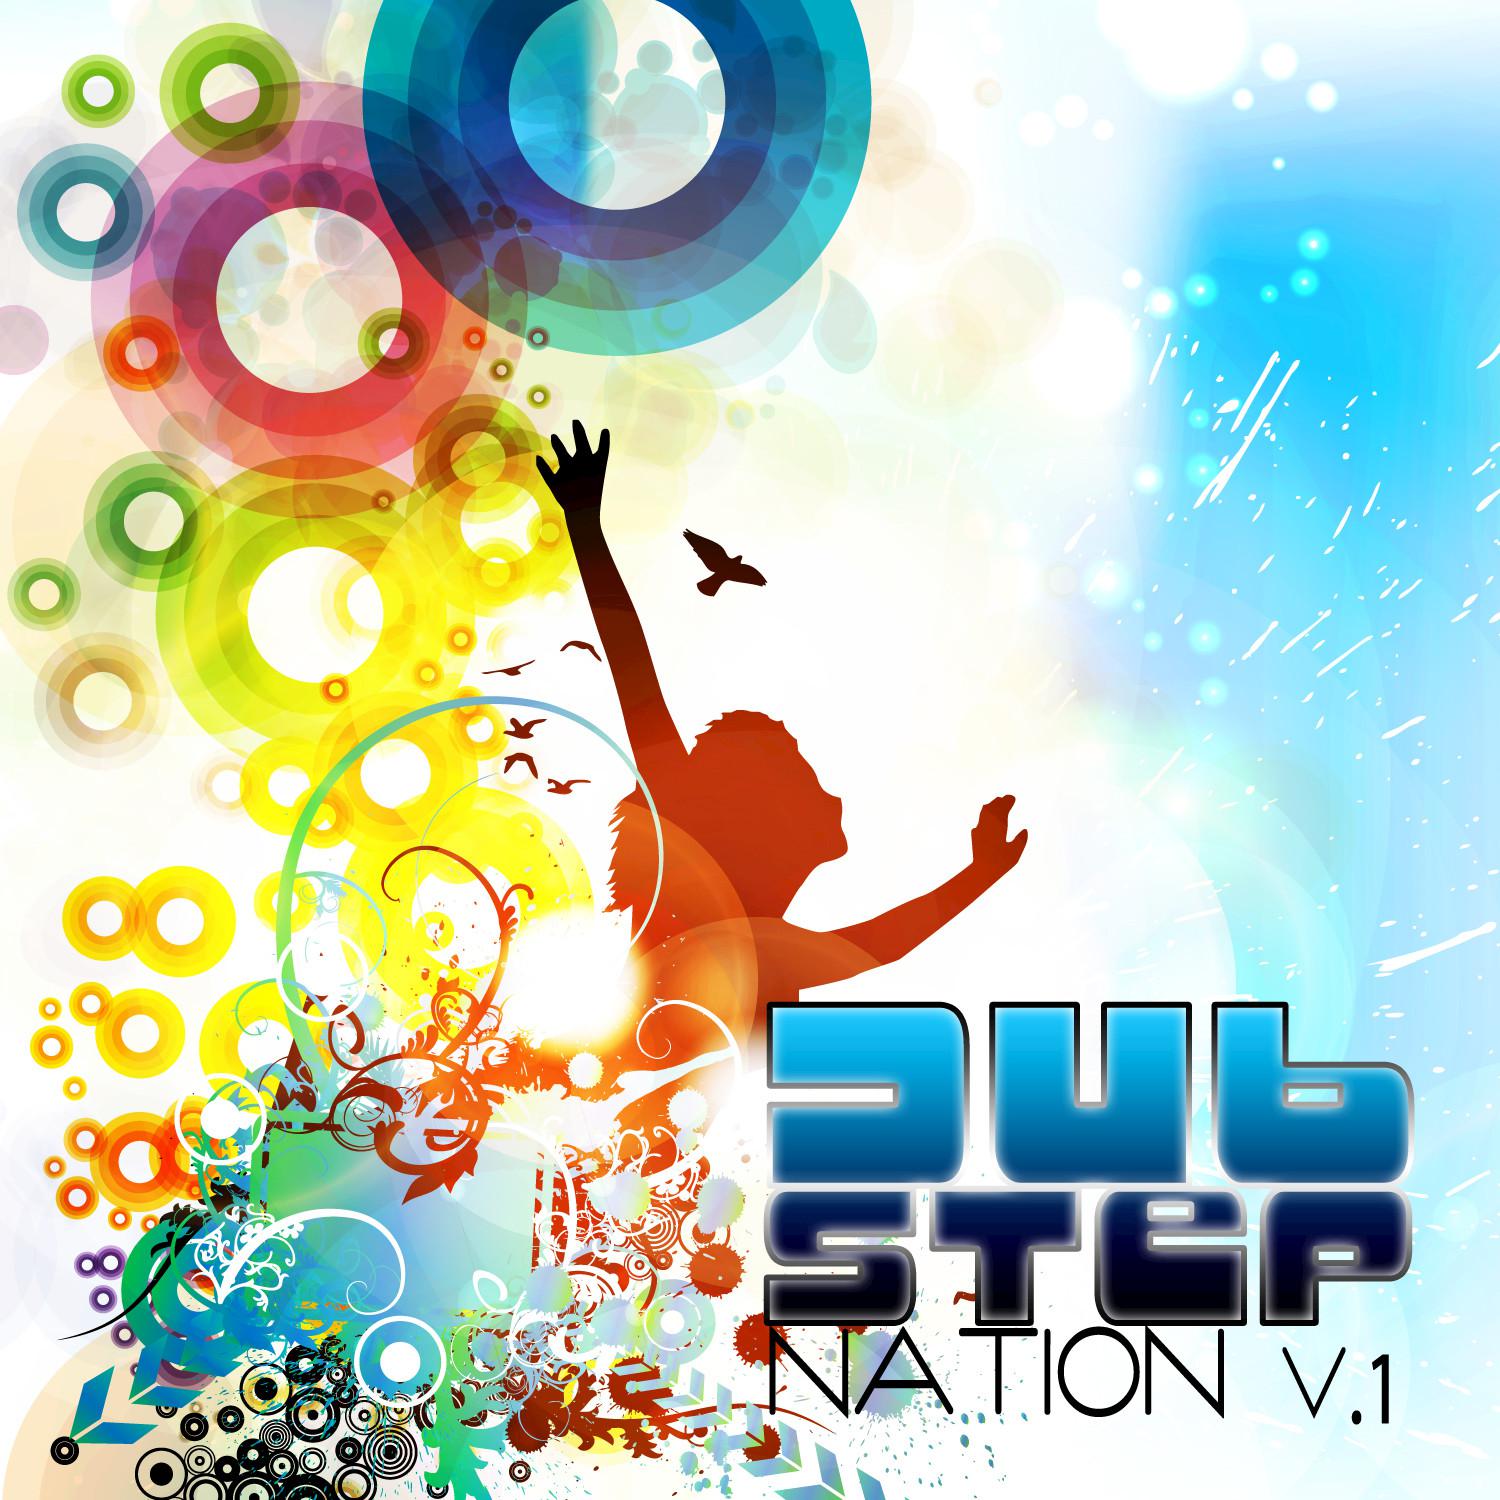 Dubstep Nation v.1 Best Top Electronic Dance Hits, Dub, Brostep, Chill, Psystep, Electro Rave Anthem